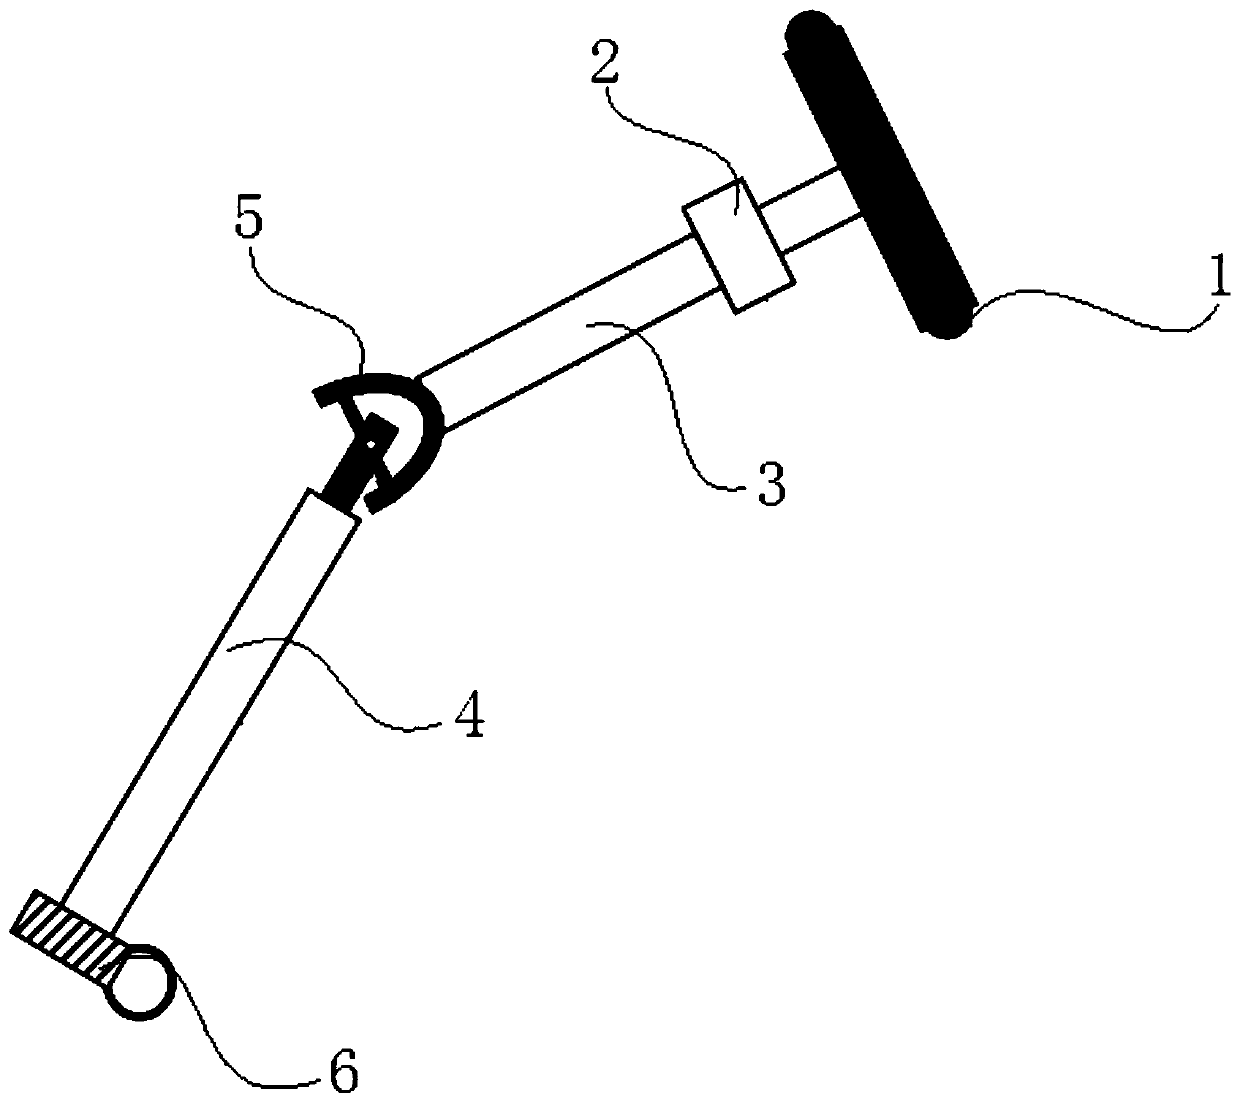 Variable speed ratio steering system based on cross shaft universal joint